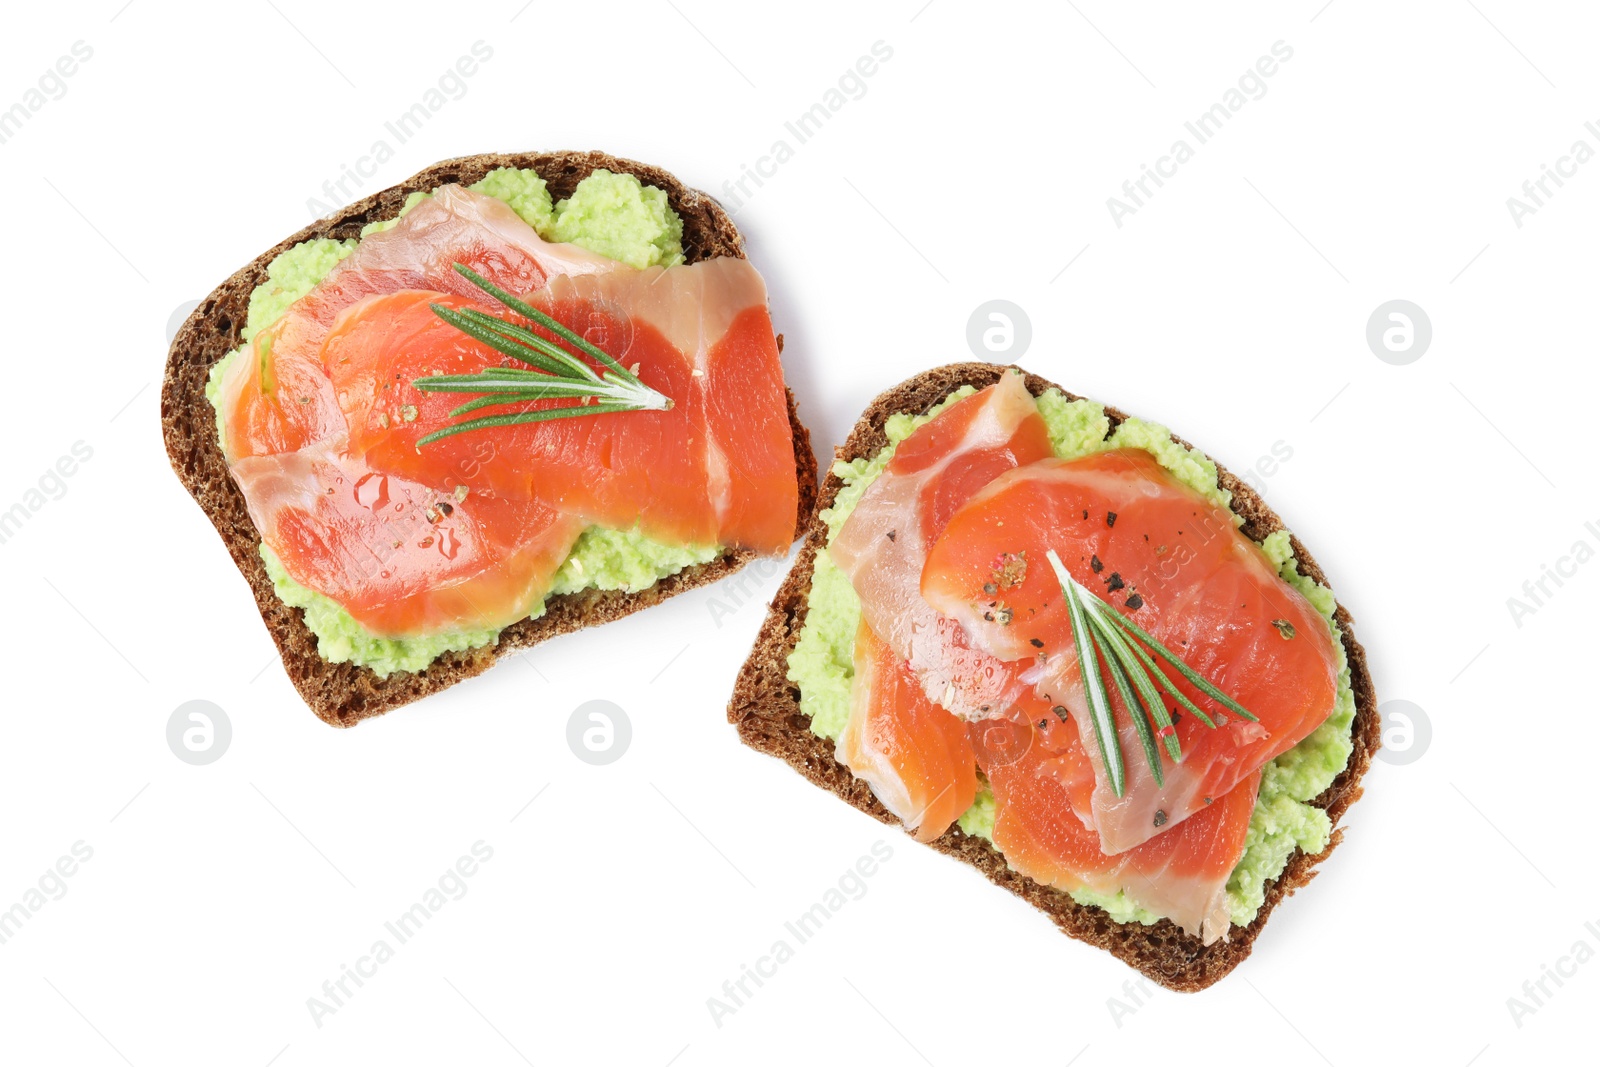 Photo of Delicious sandwiches with salmon, avocado and rosemary on white background, top view